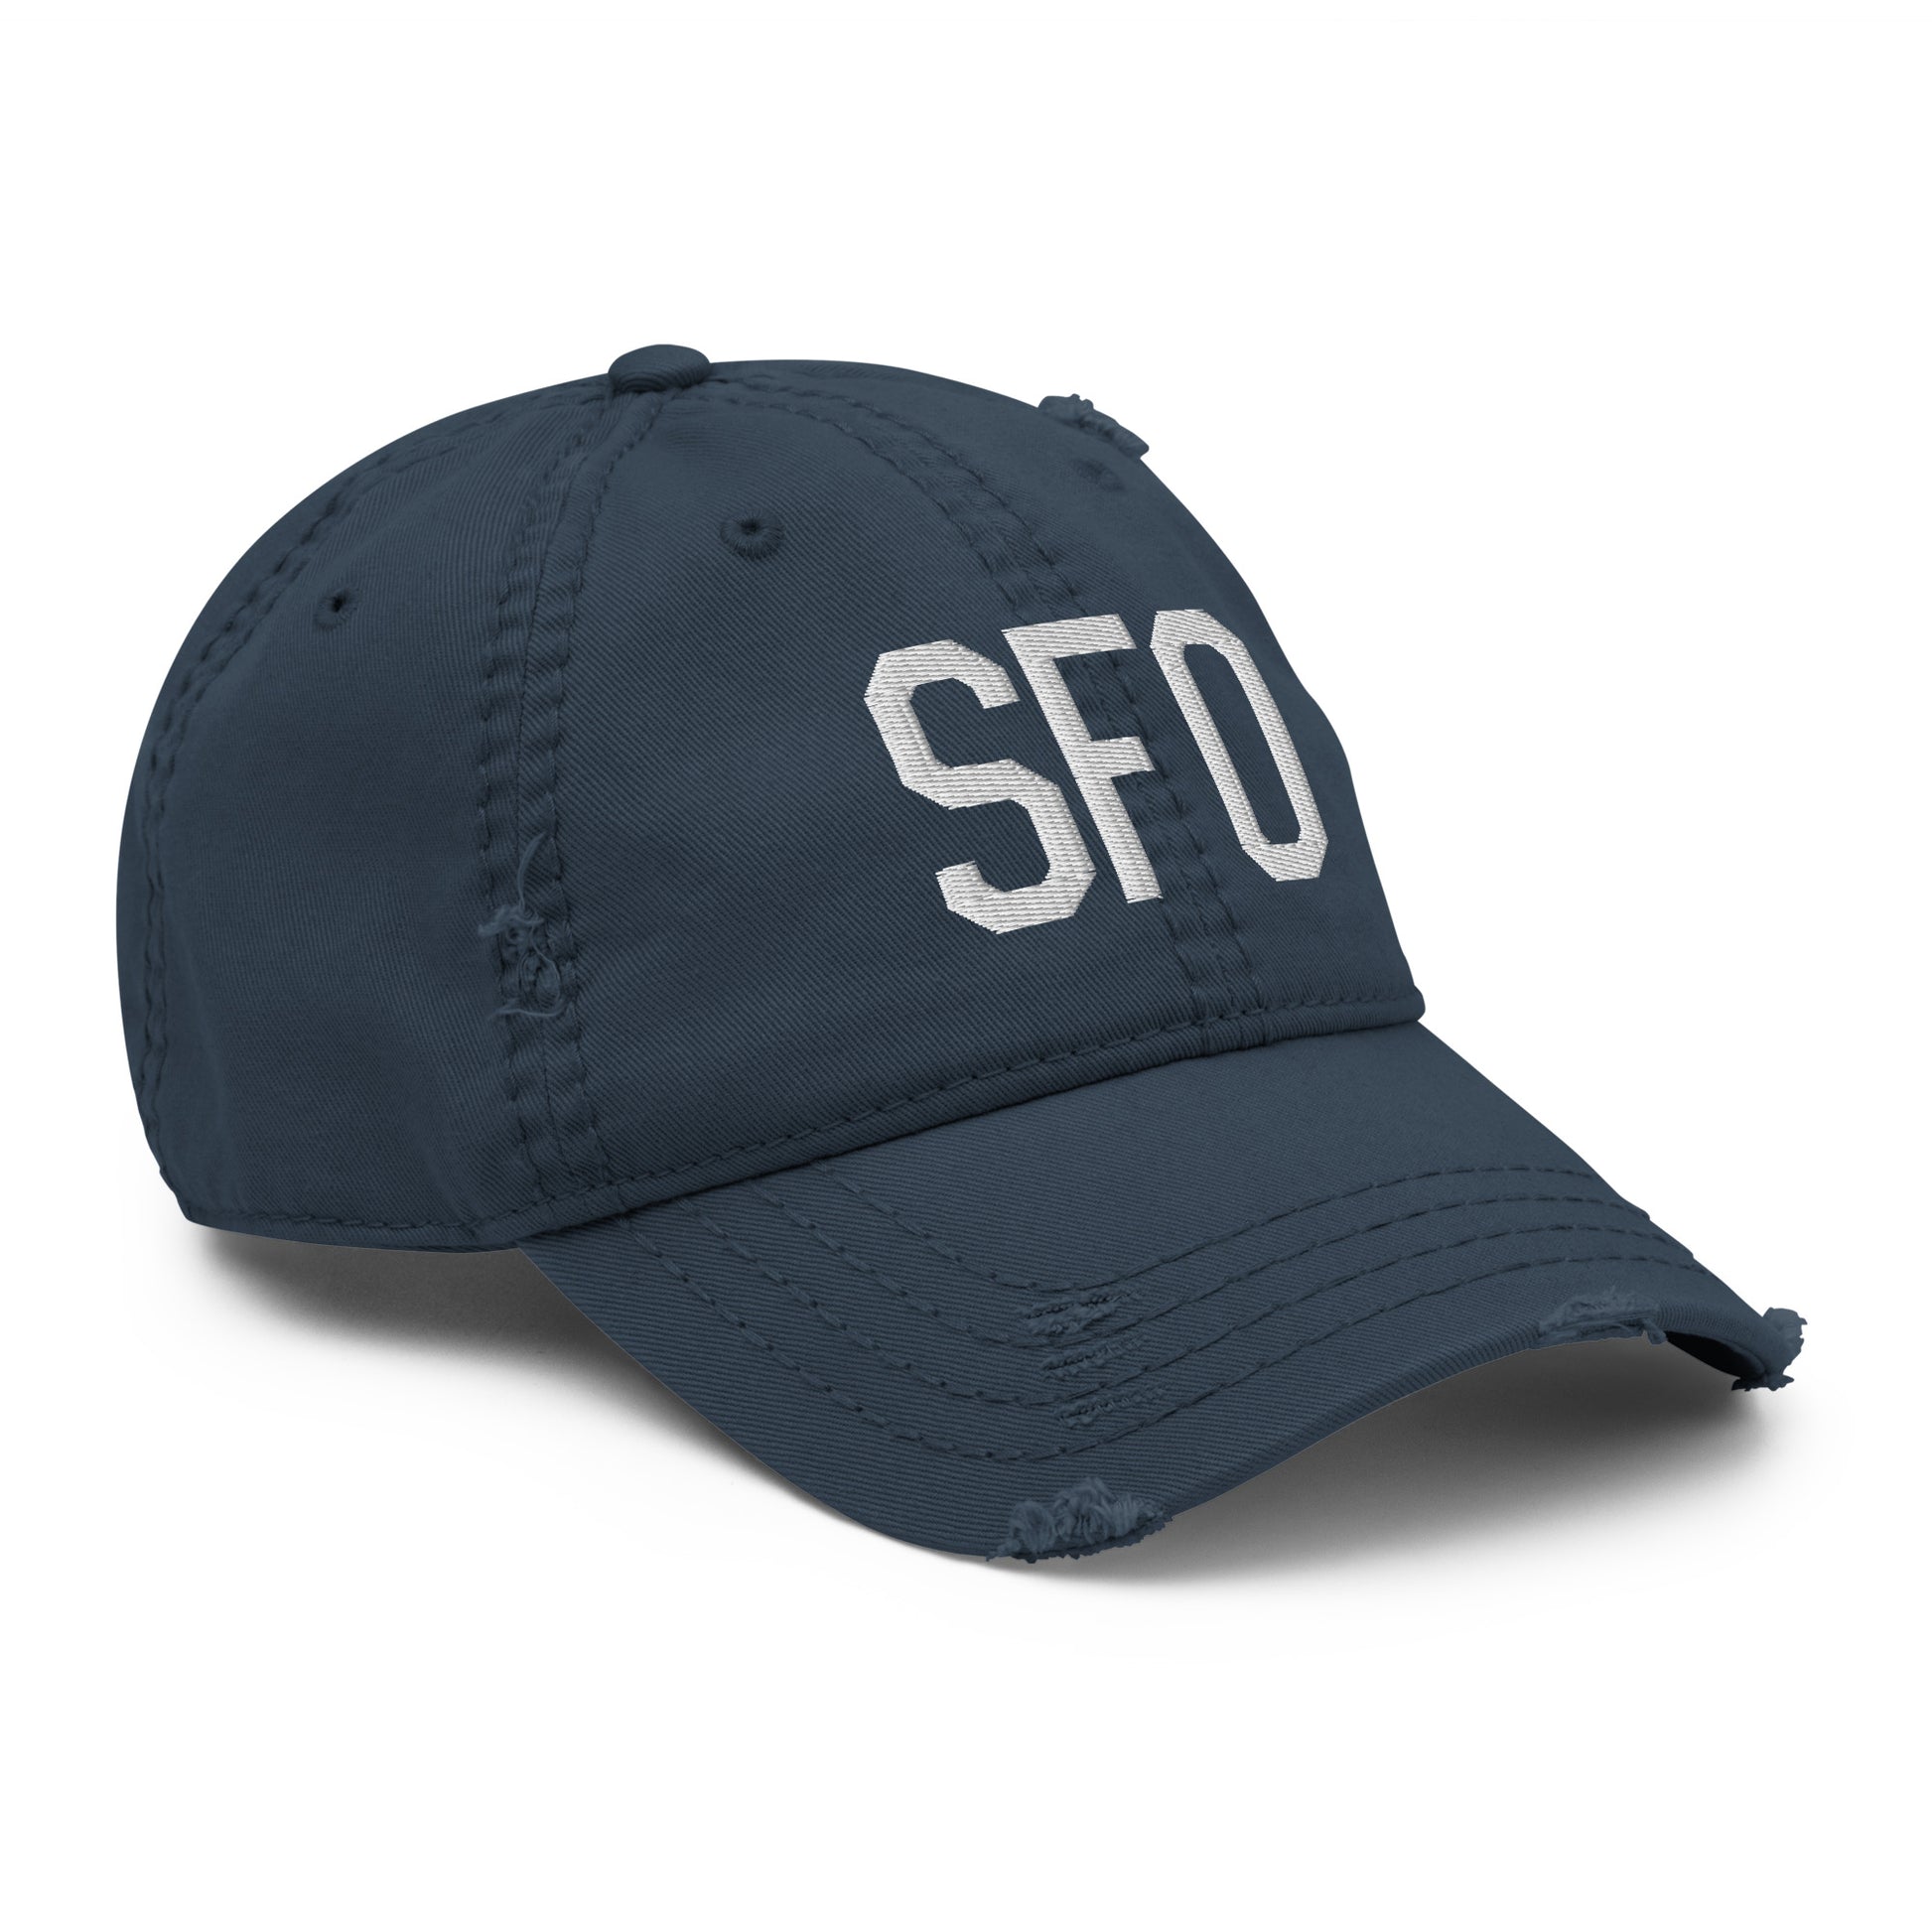 Airport Code Distressed Hat - White • SFO San Francisco • YHM Designs - Image 14